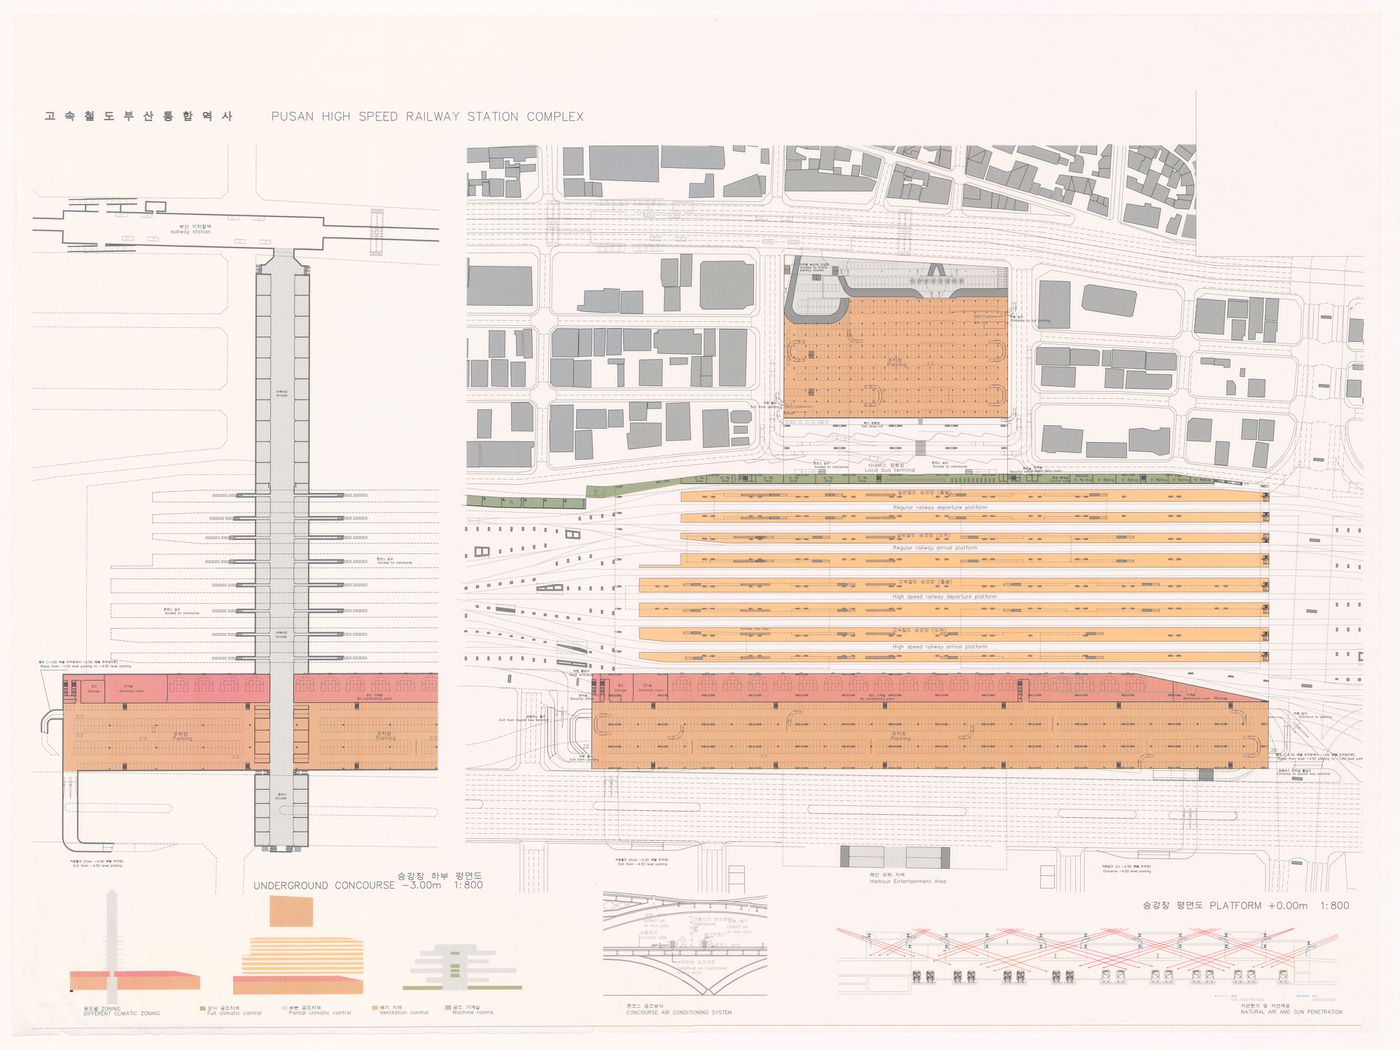 Plan, site plan, and details for High-Speed Railway Complex, Busan, South Korea